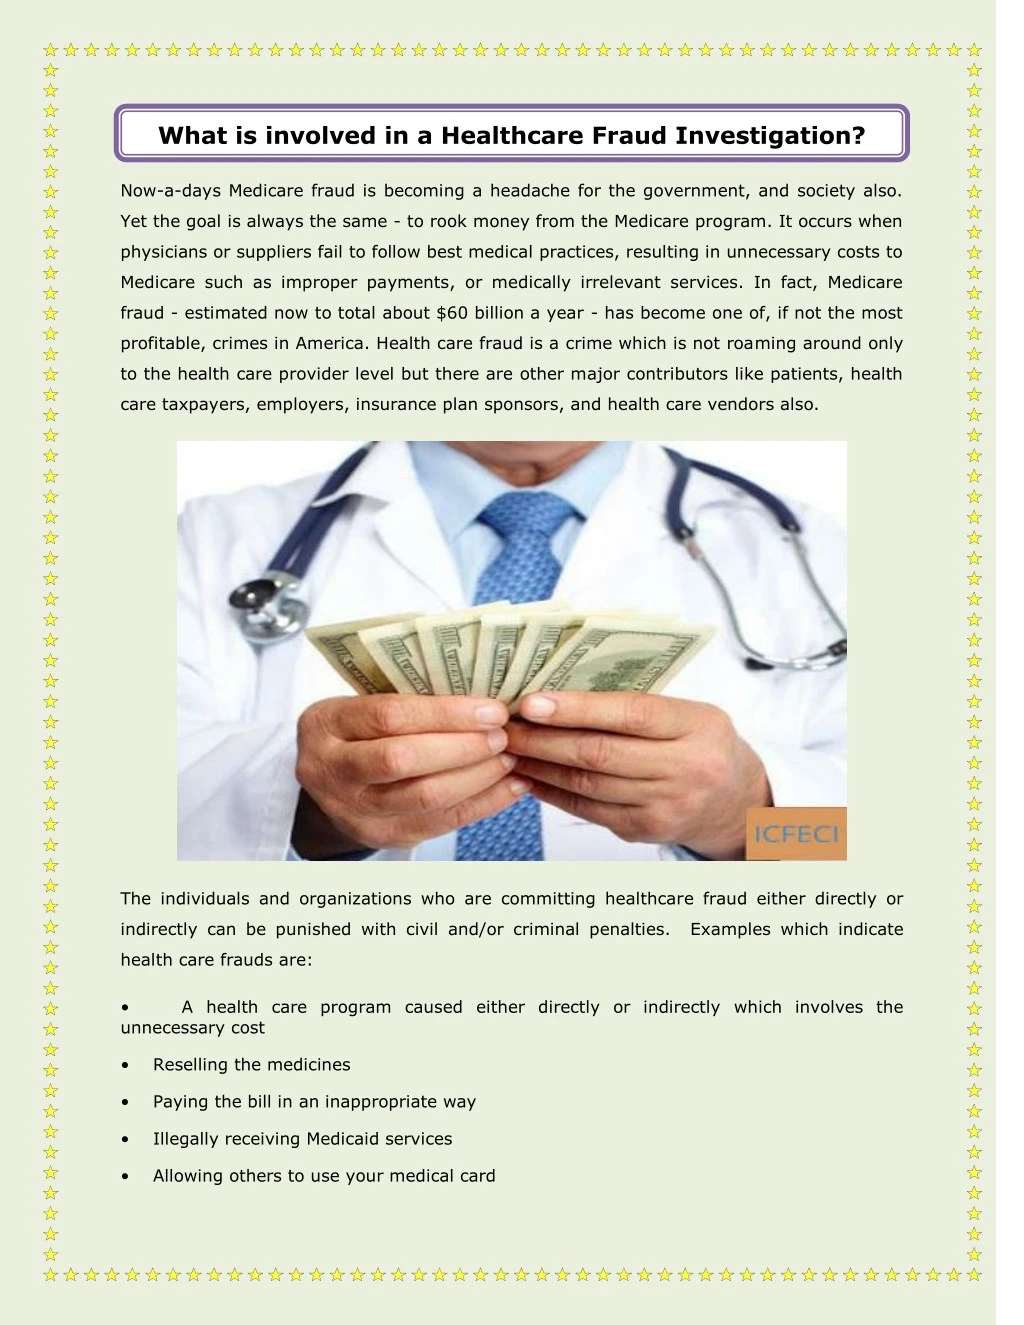 what is involved in a healthcare fraud